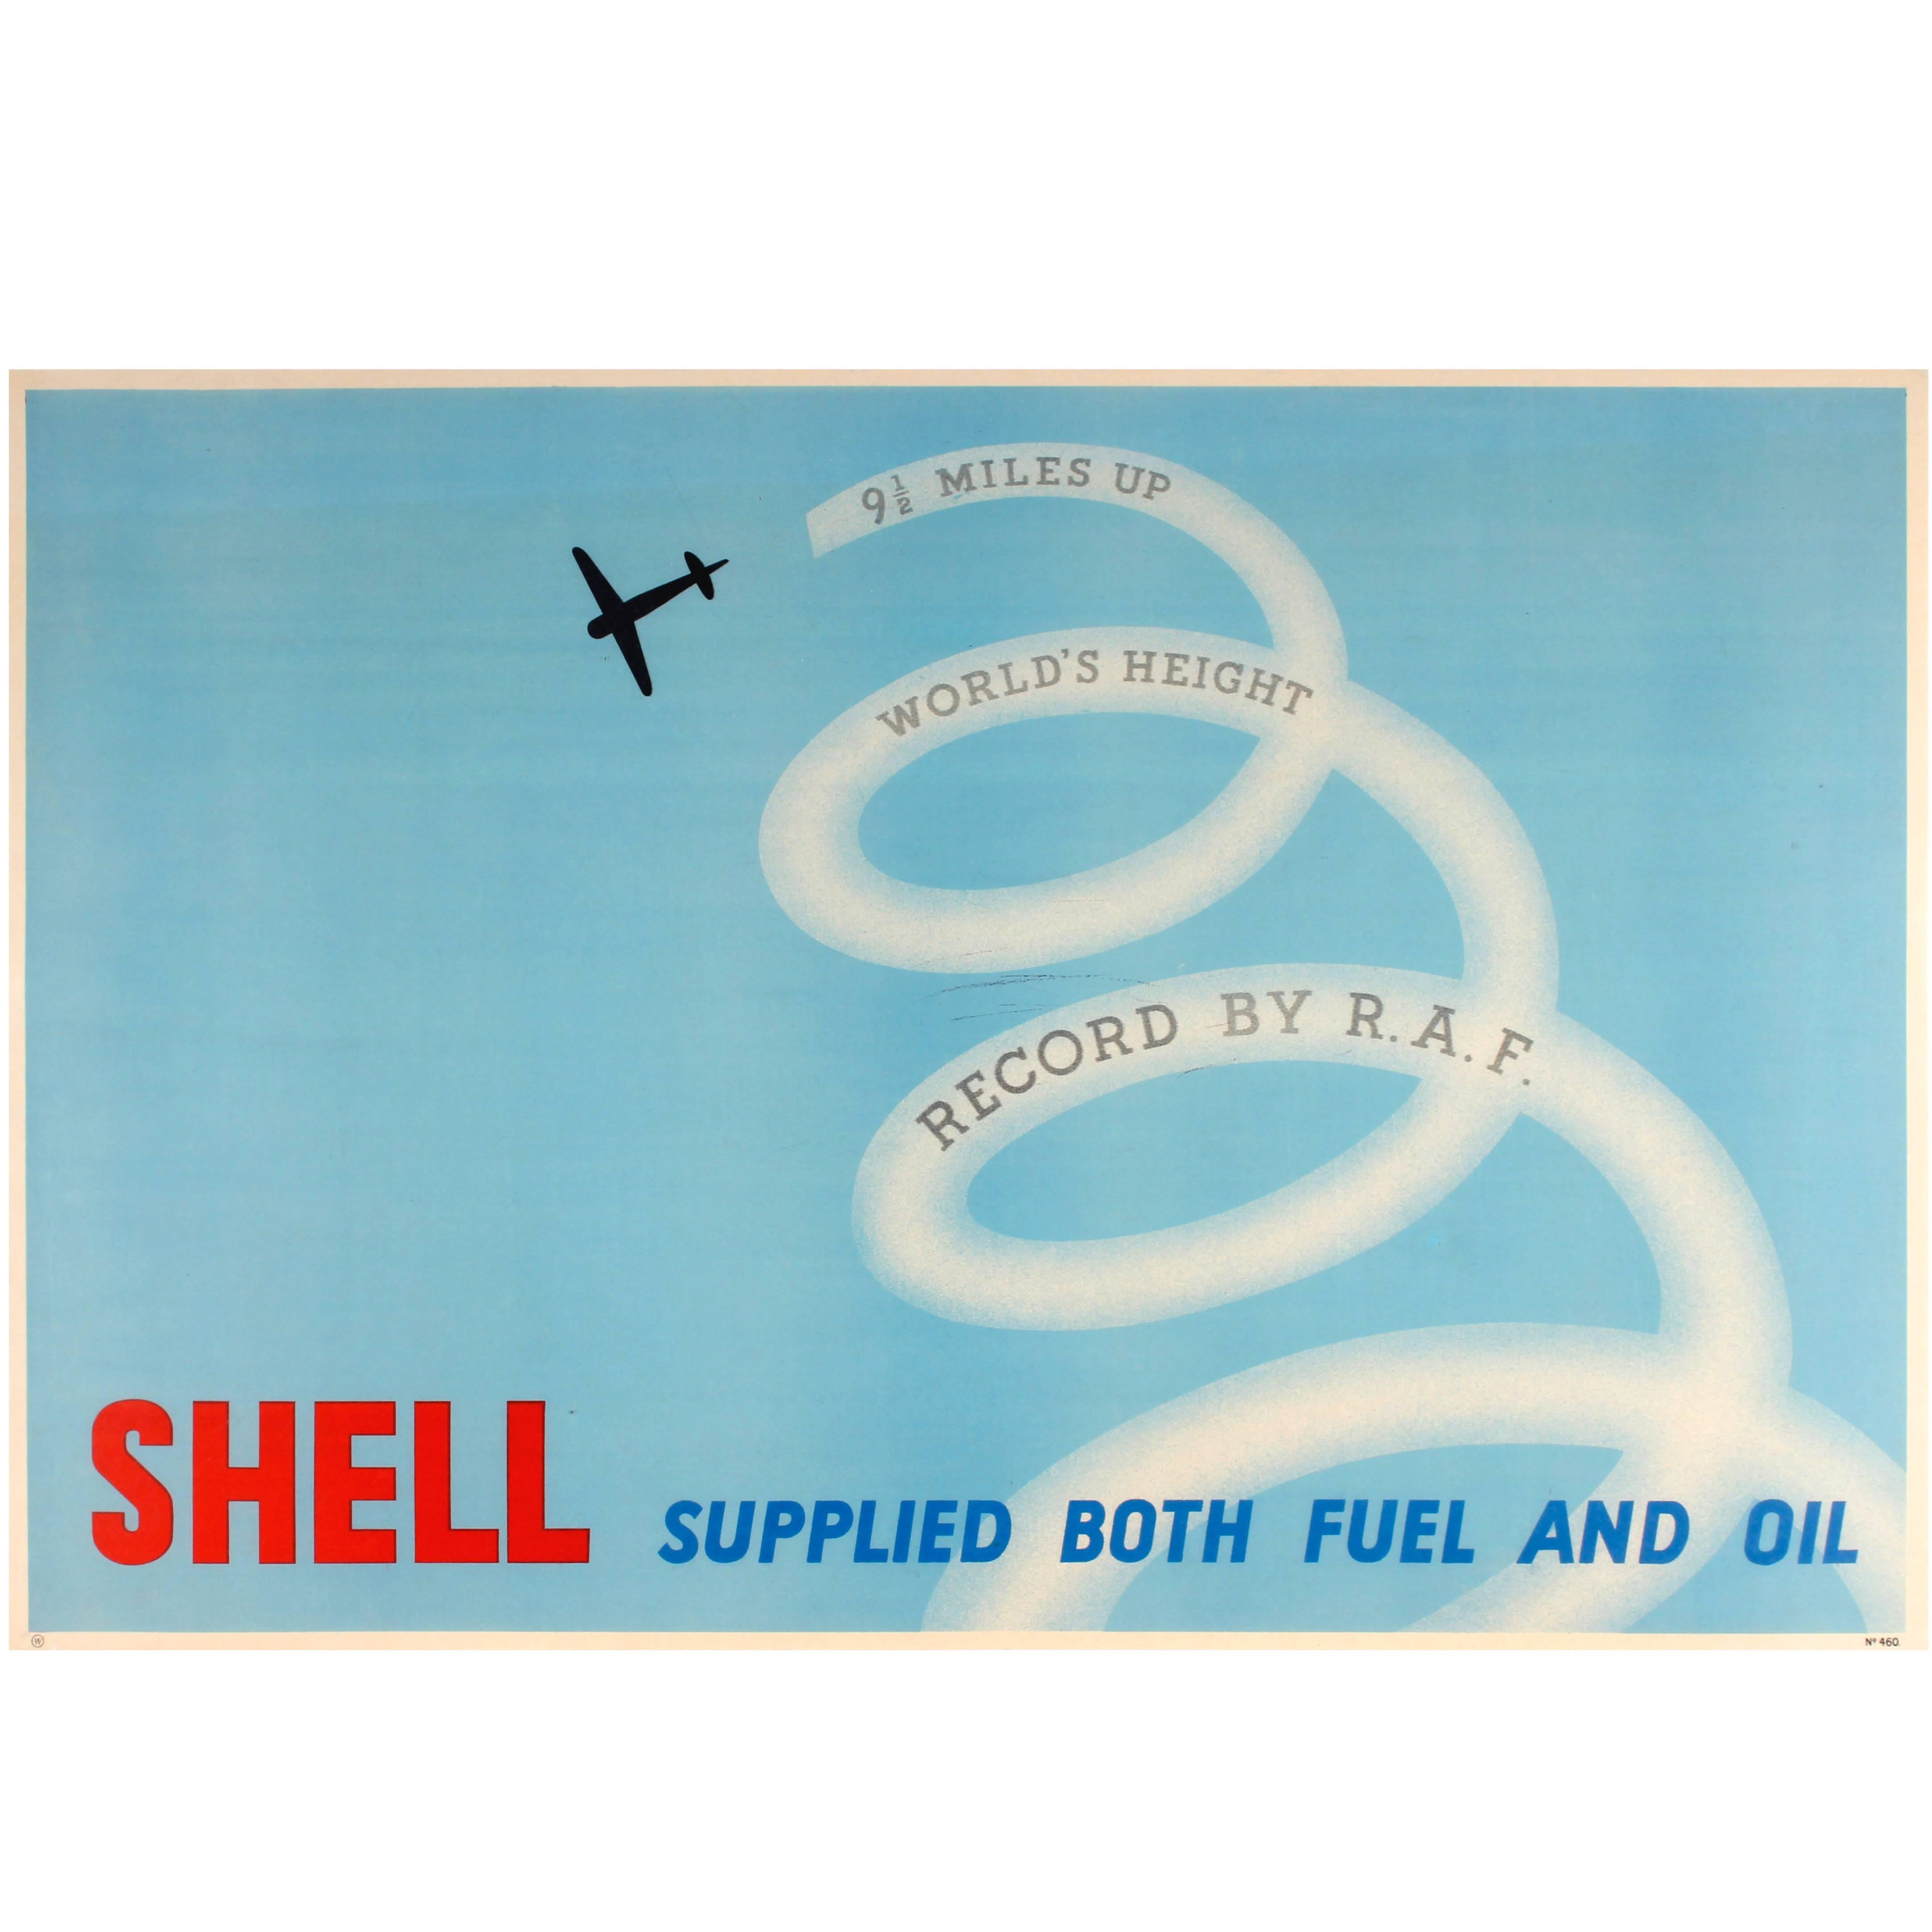 Affiche des années 1930 ""9 Miles Up World Height Record by RAF - Shell Oil & Fuel"" en vente